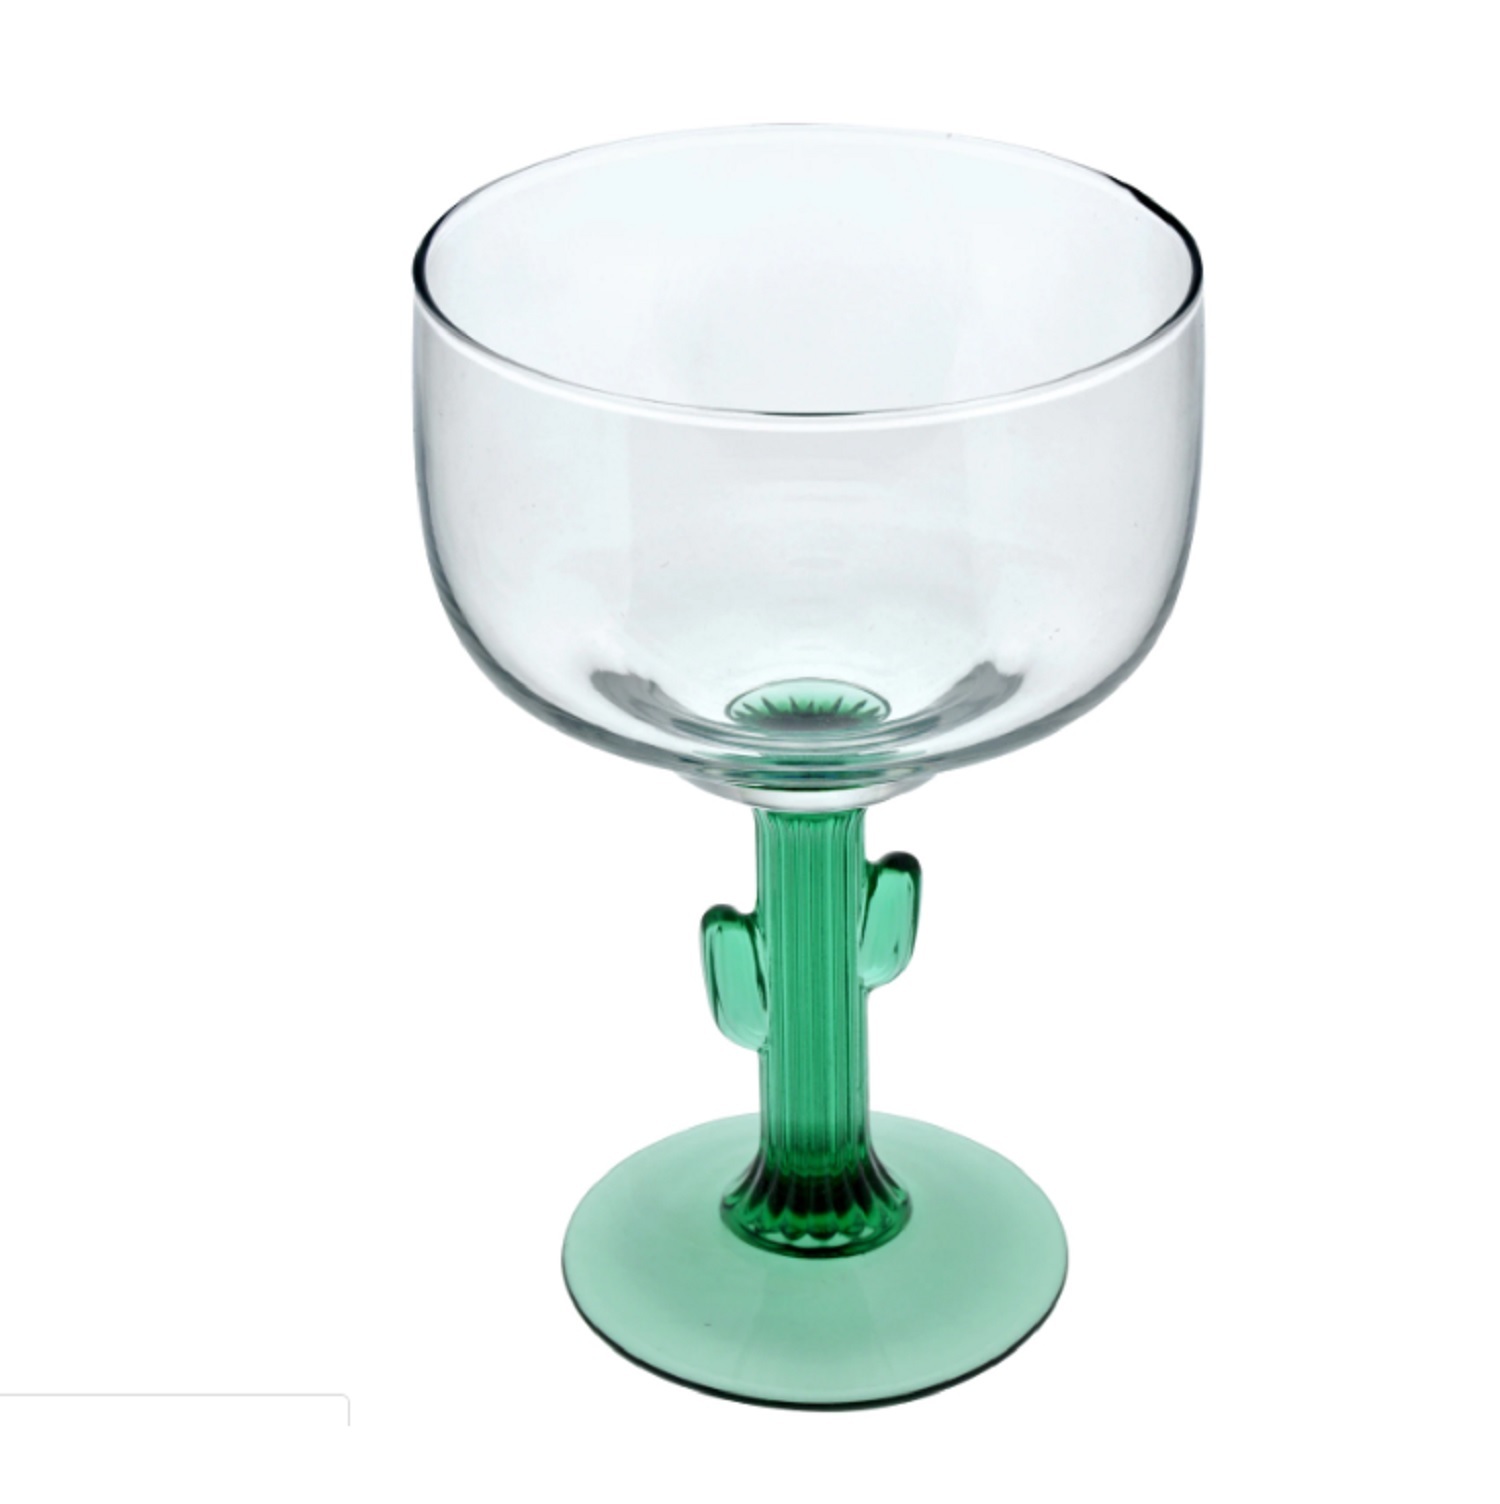 Margarita Glass with Green Cactus Stem 16oz for Succulent Lover - $8.99